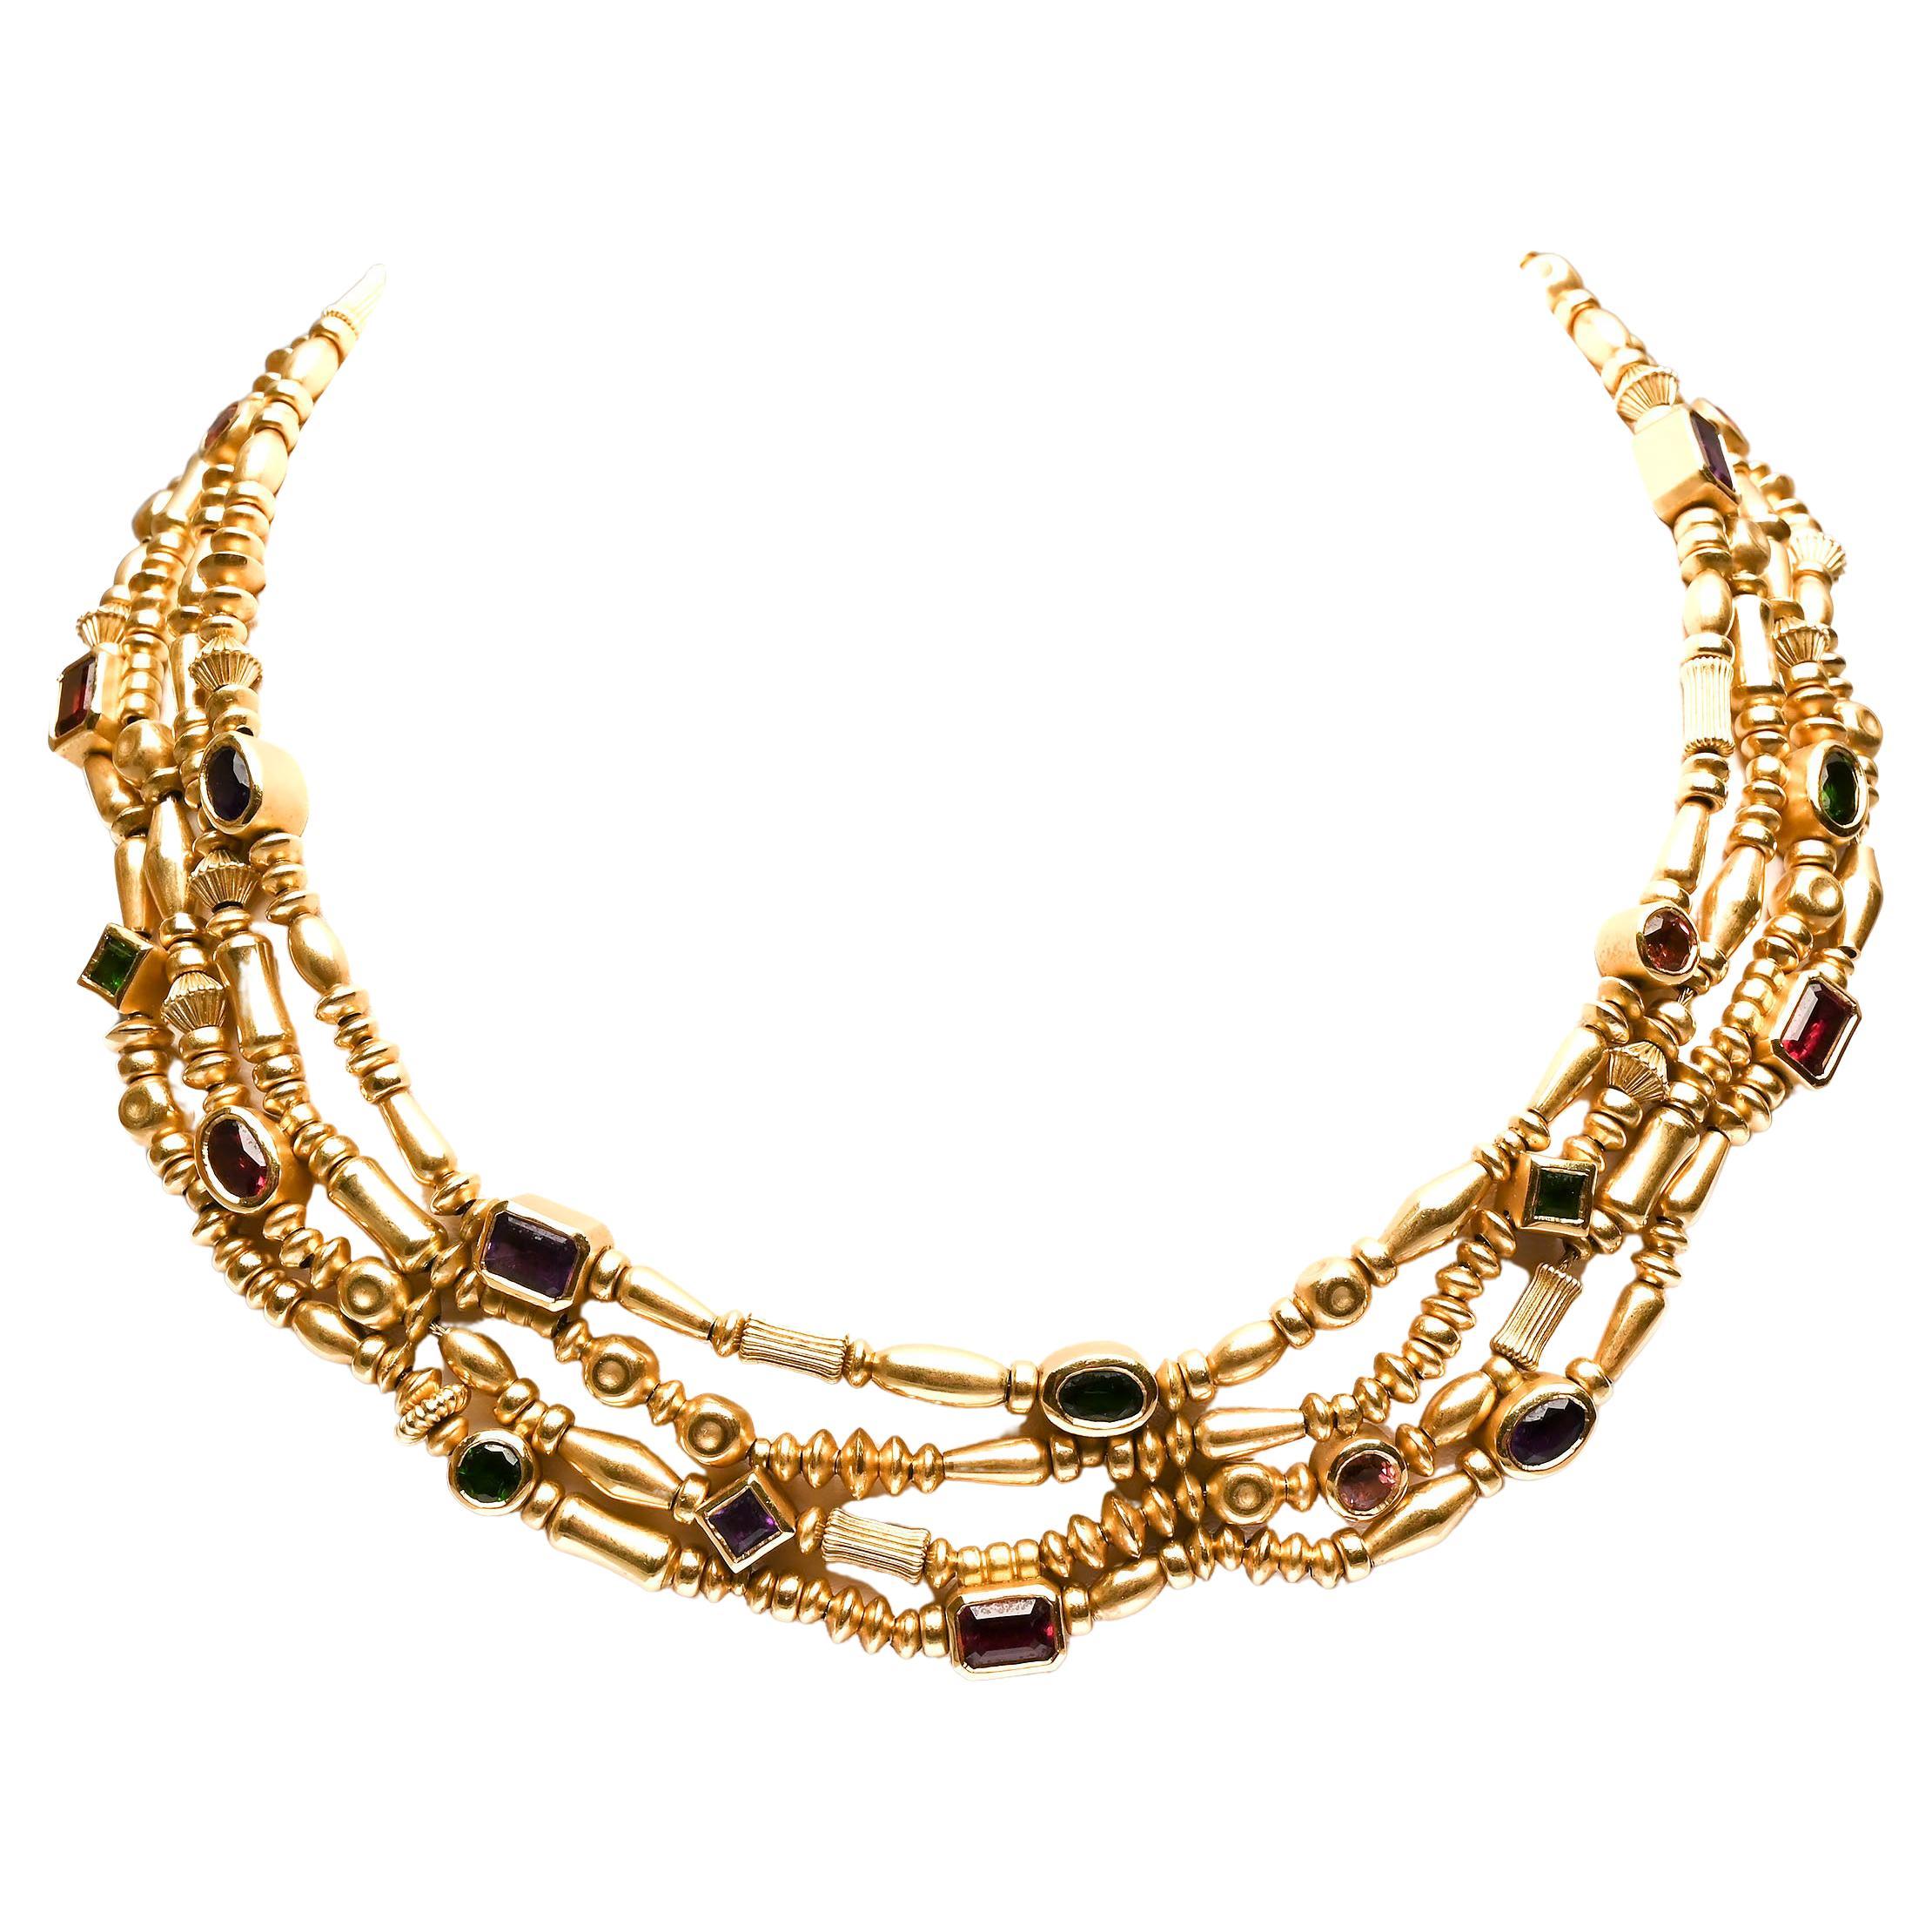 This multistrand gold bead necklace by Seidengang is both sporty and elegant. It consists of four strands of gold beads in a variety of shapes and sizes. Interspersed are round; oval; square and rectangular stones that include: amethyst; citrine;